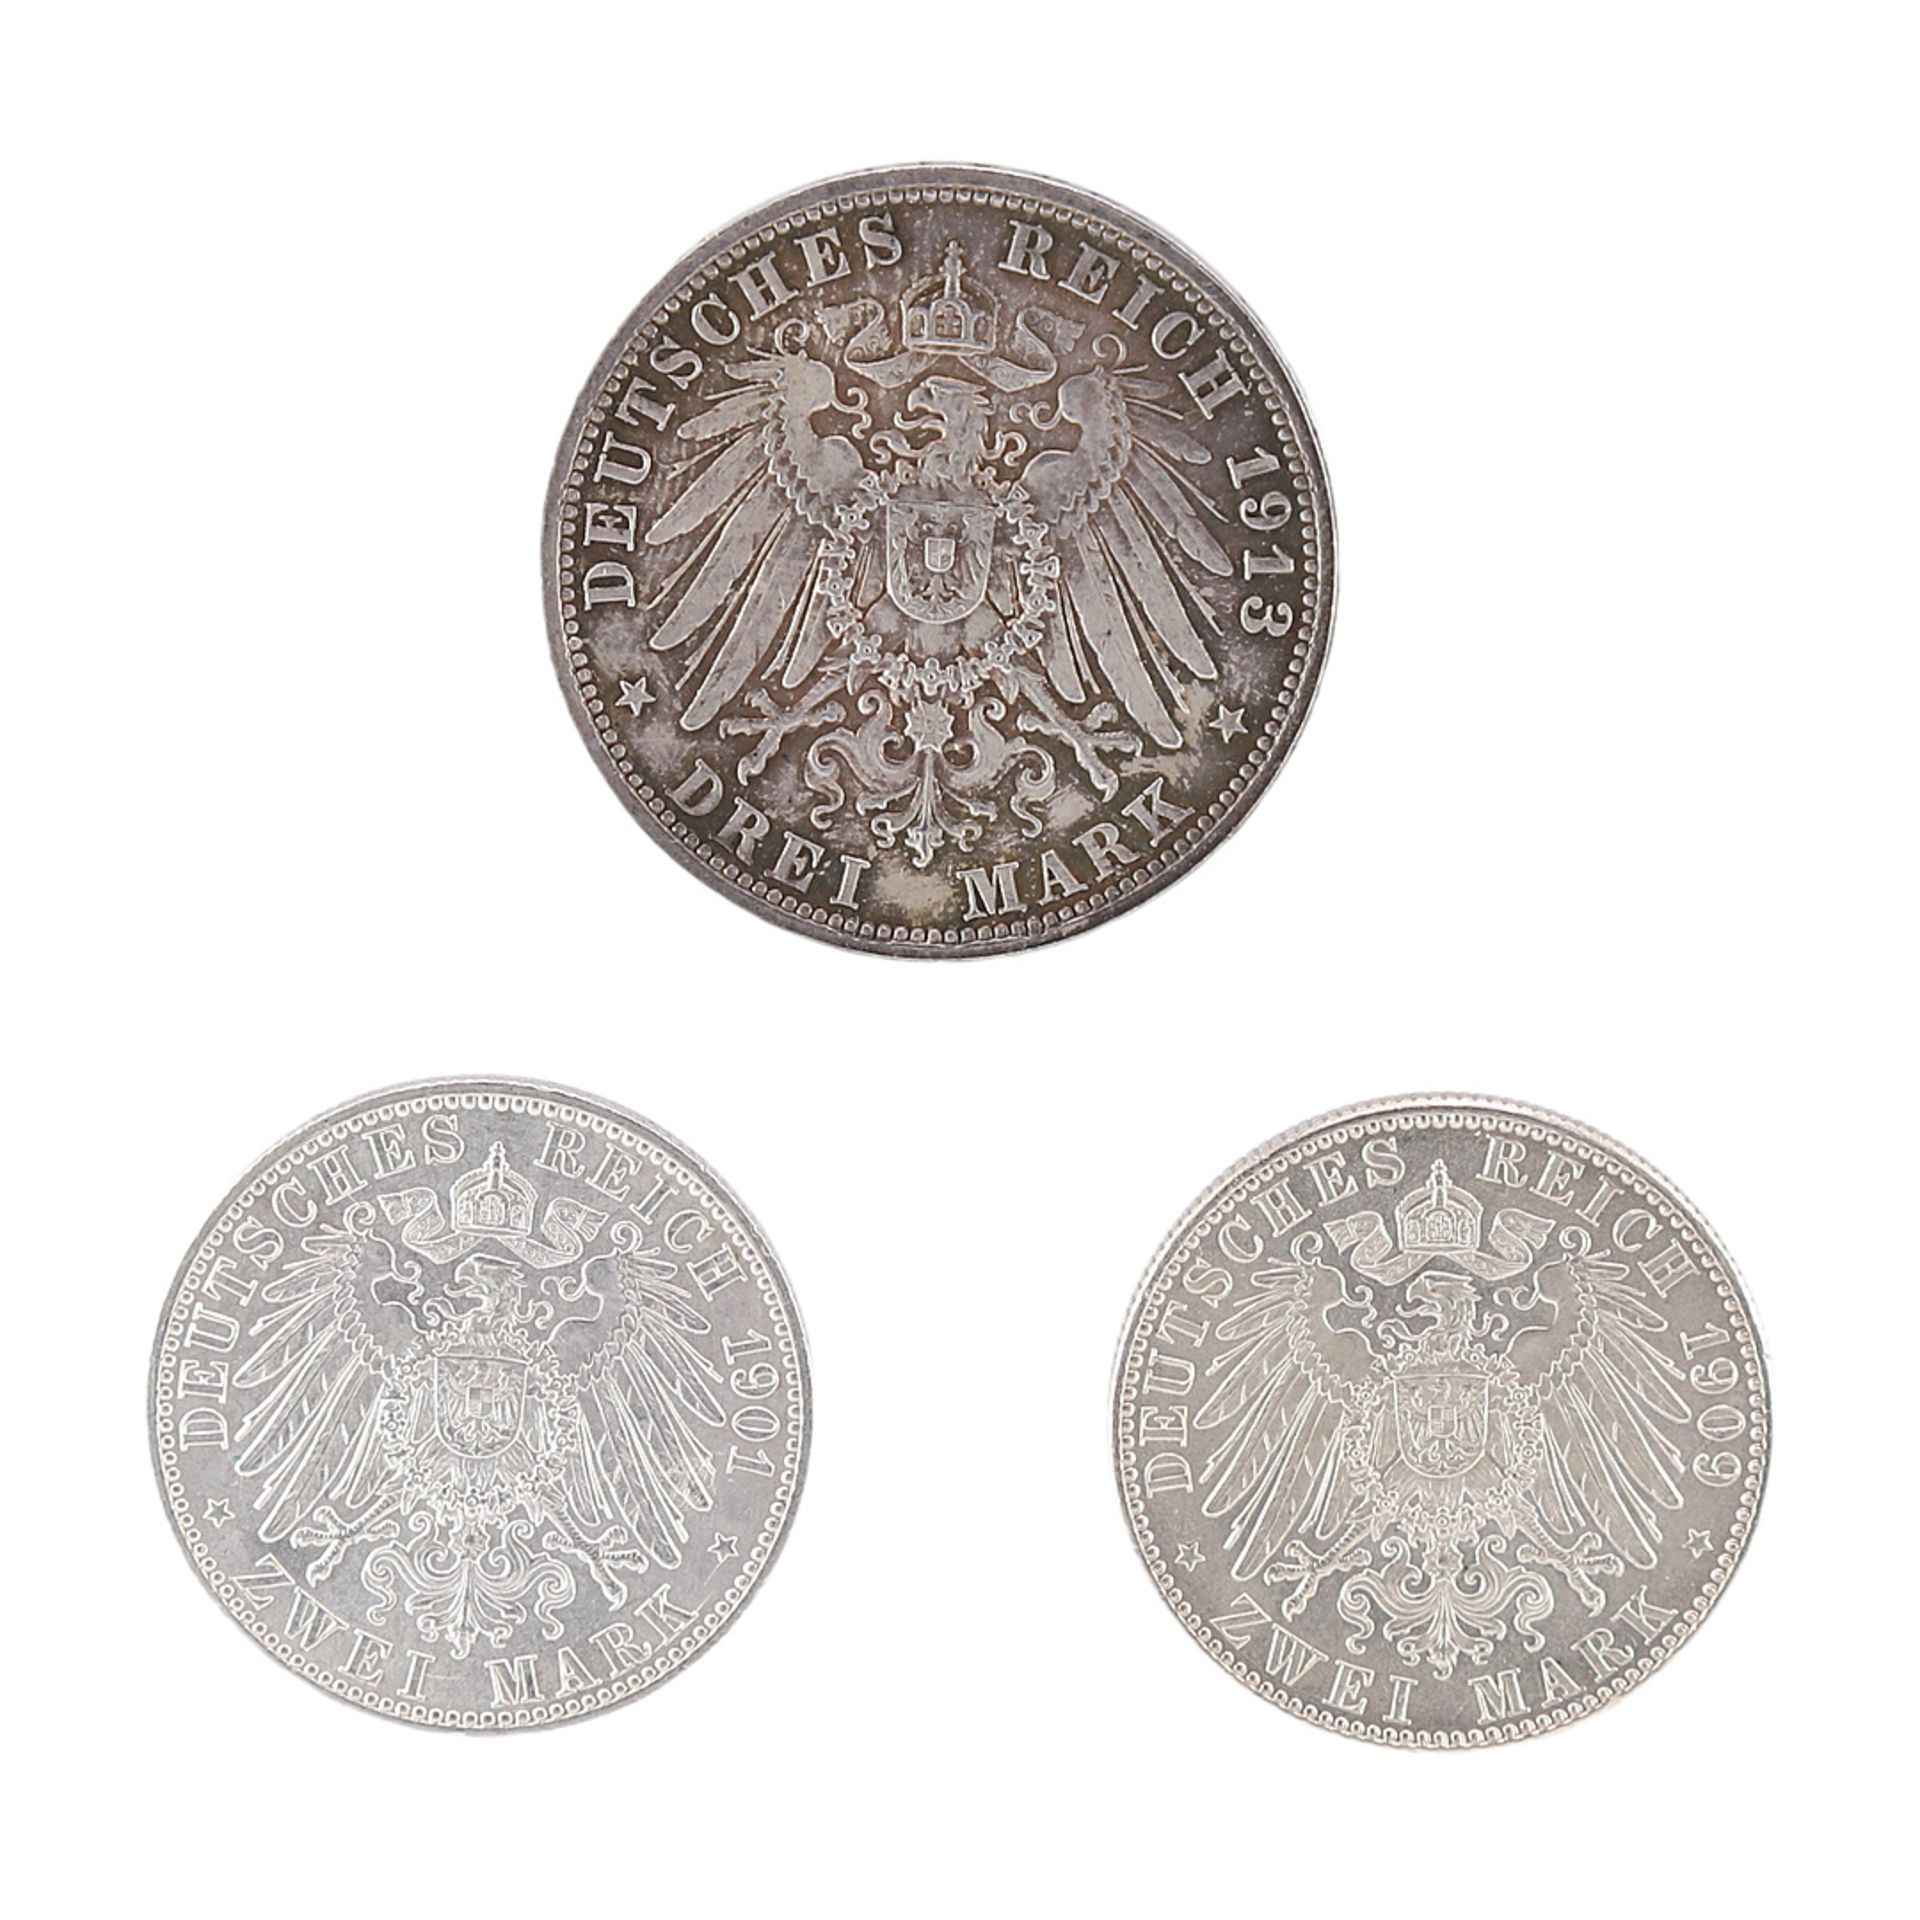 3 coins German Empire, Saxony and Prussia - Image 2 of 2